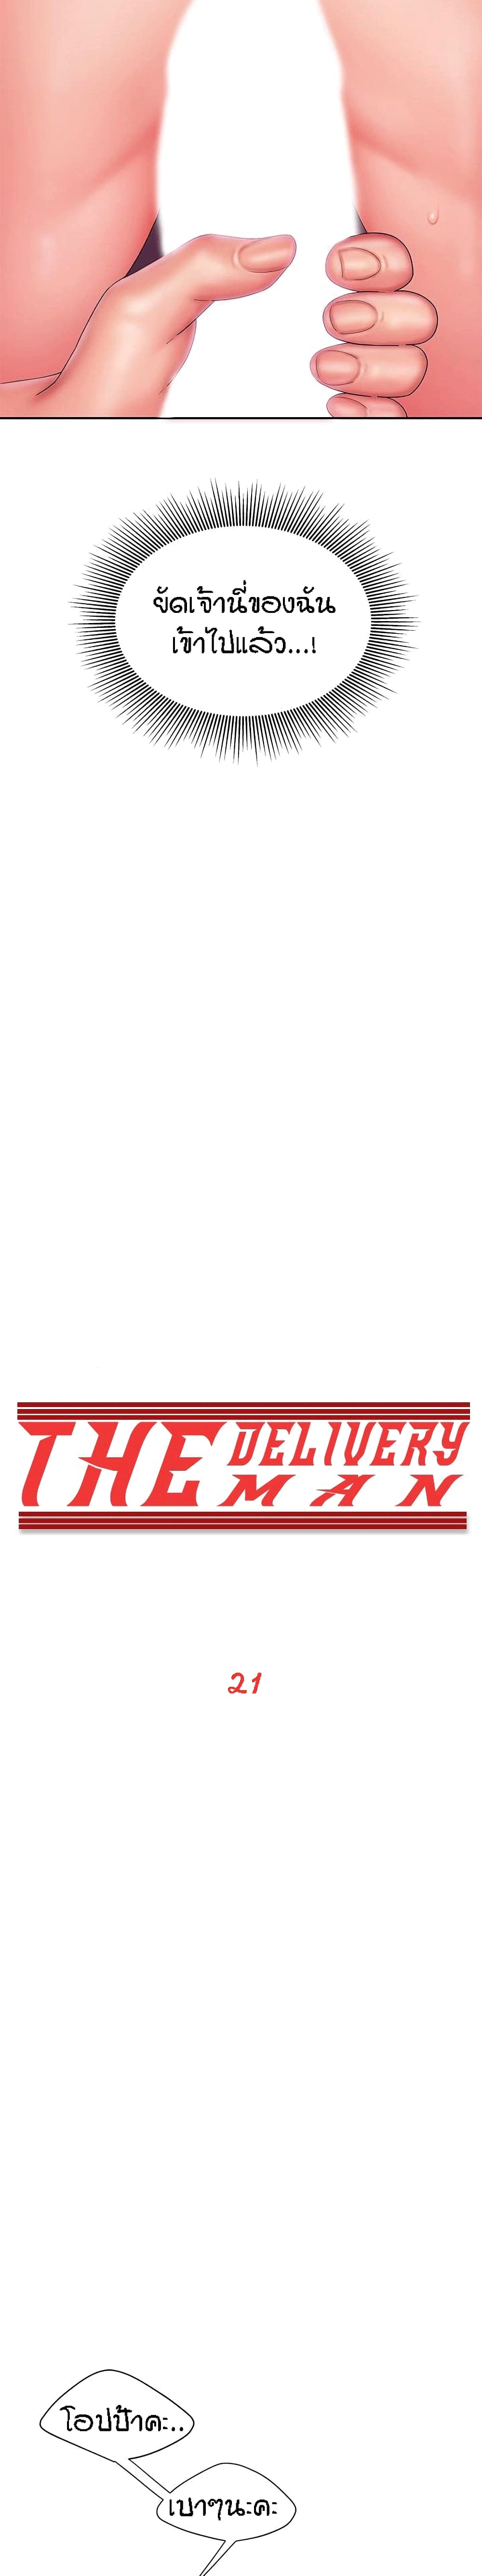 Delivery man 21 02